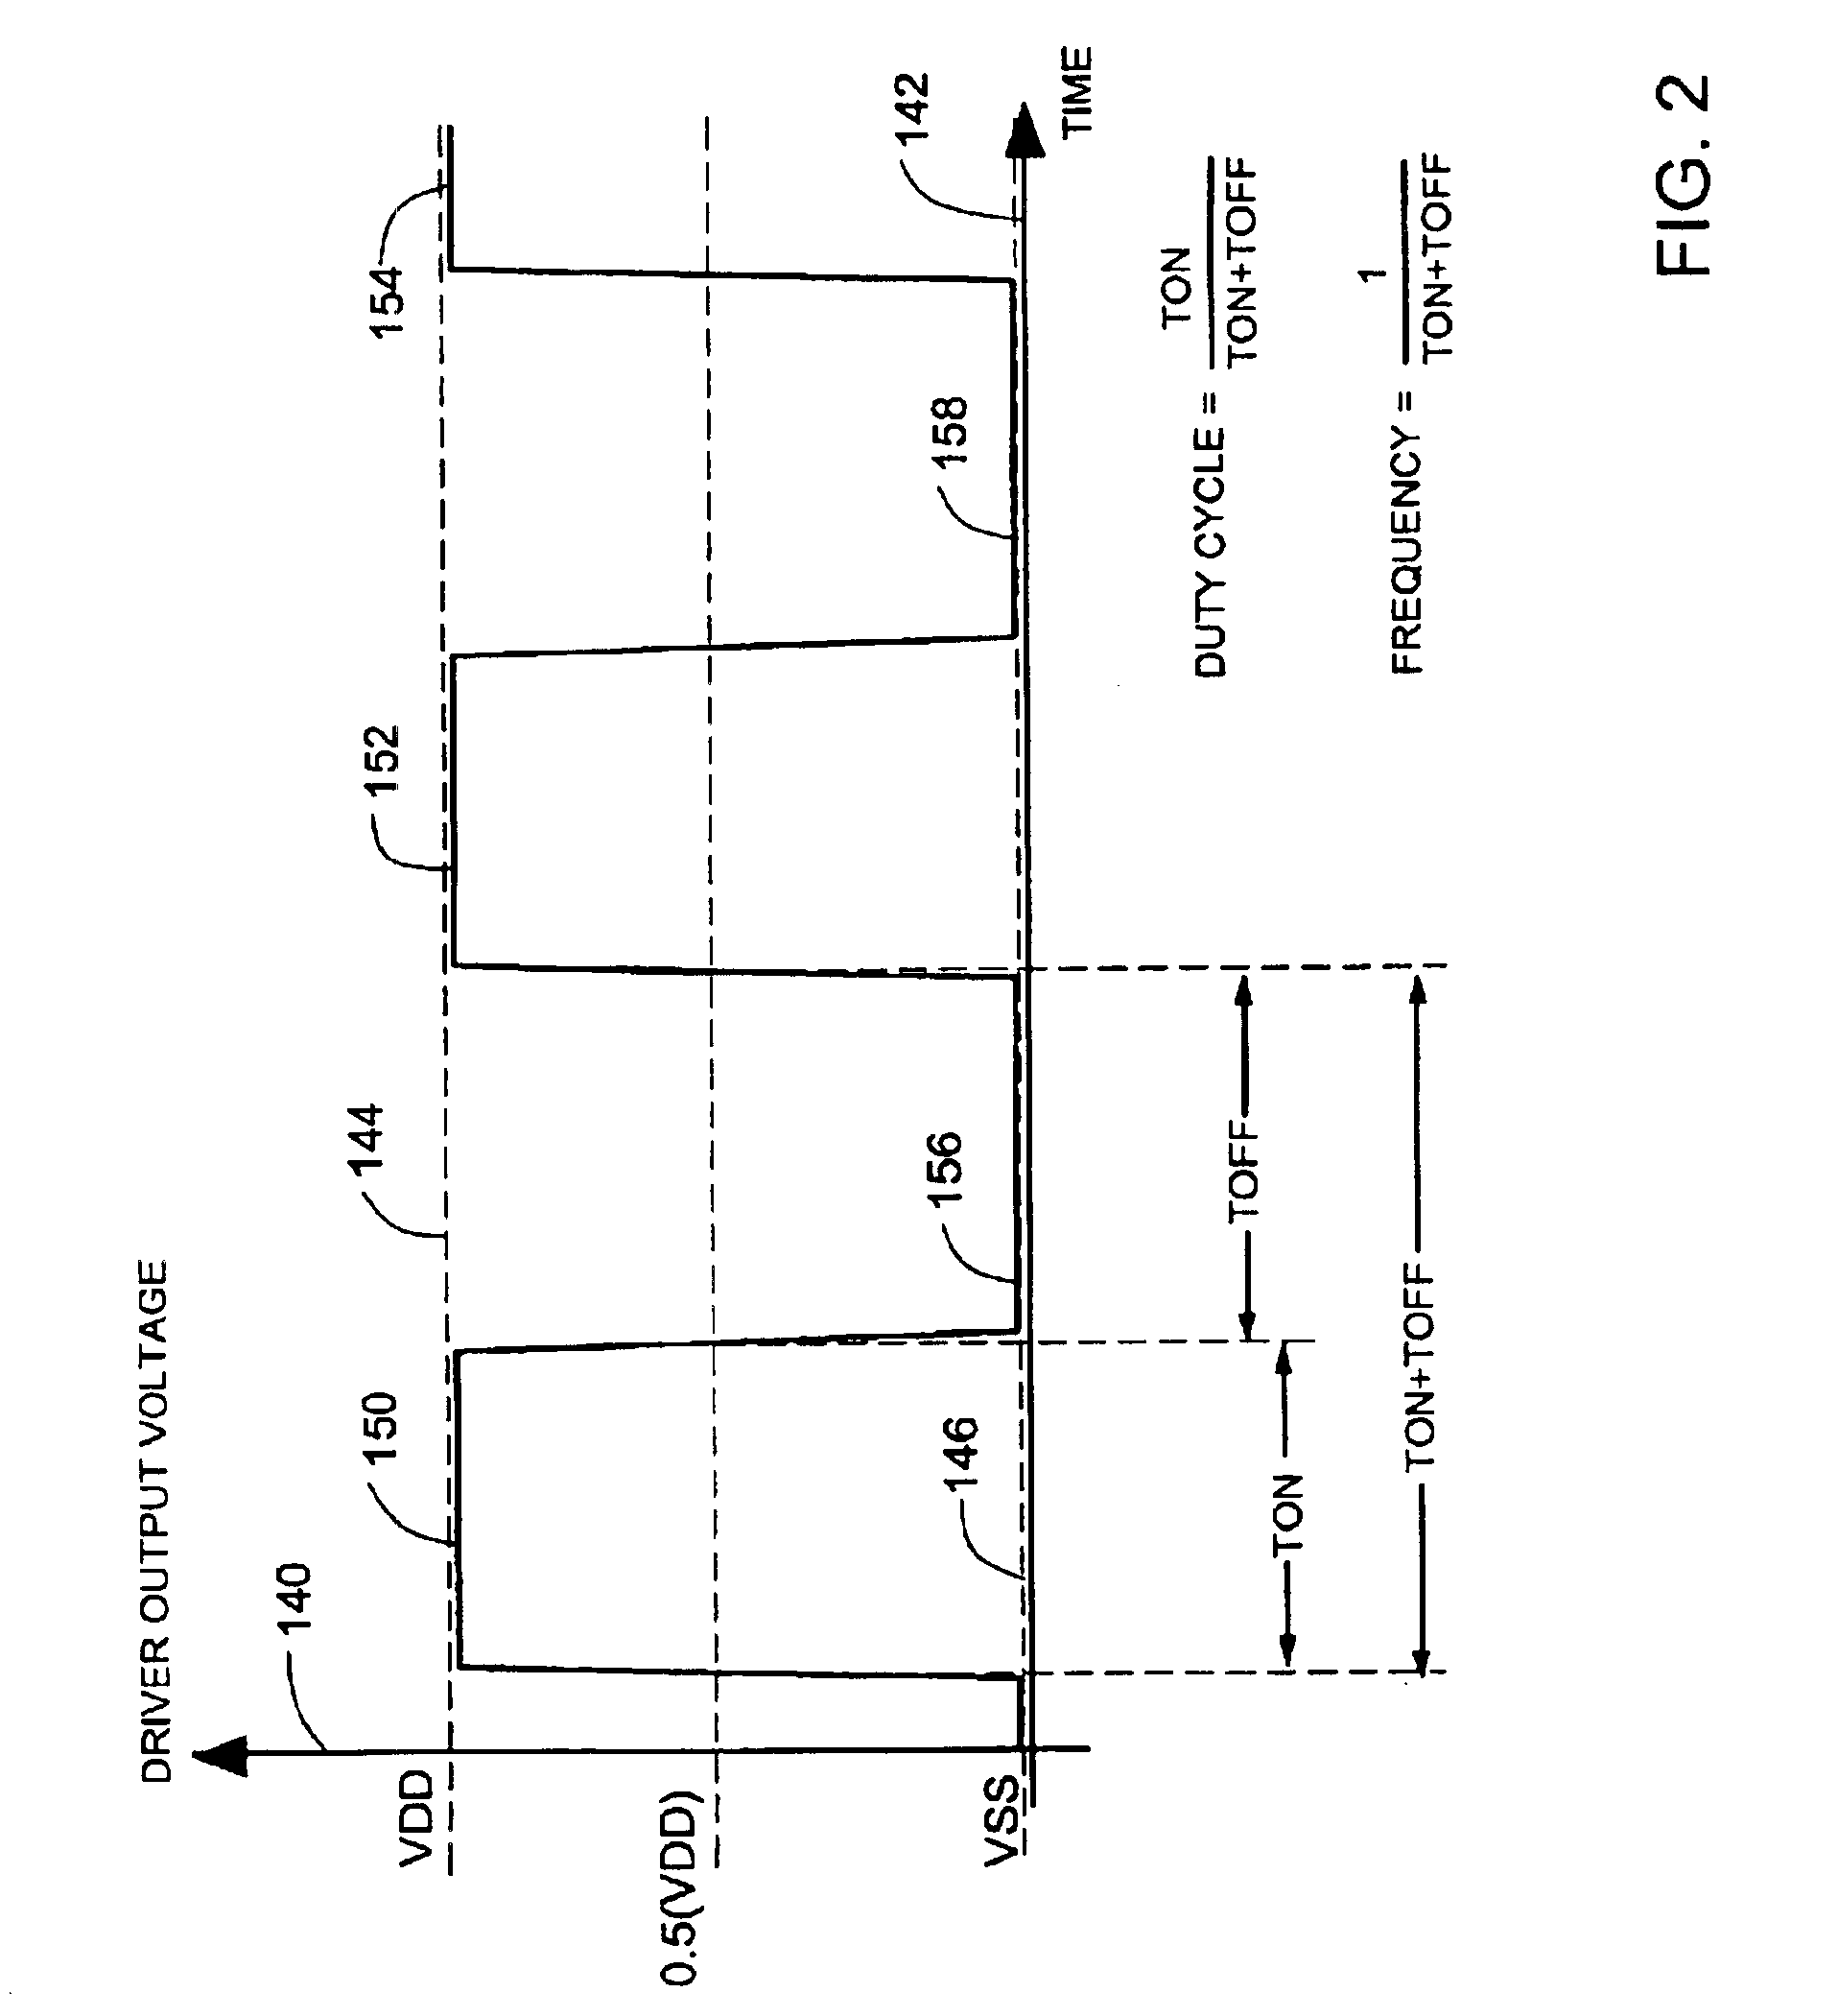 Current mode bang-bang controller in a switching voltage regulator